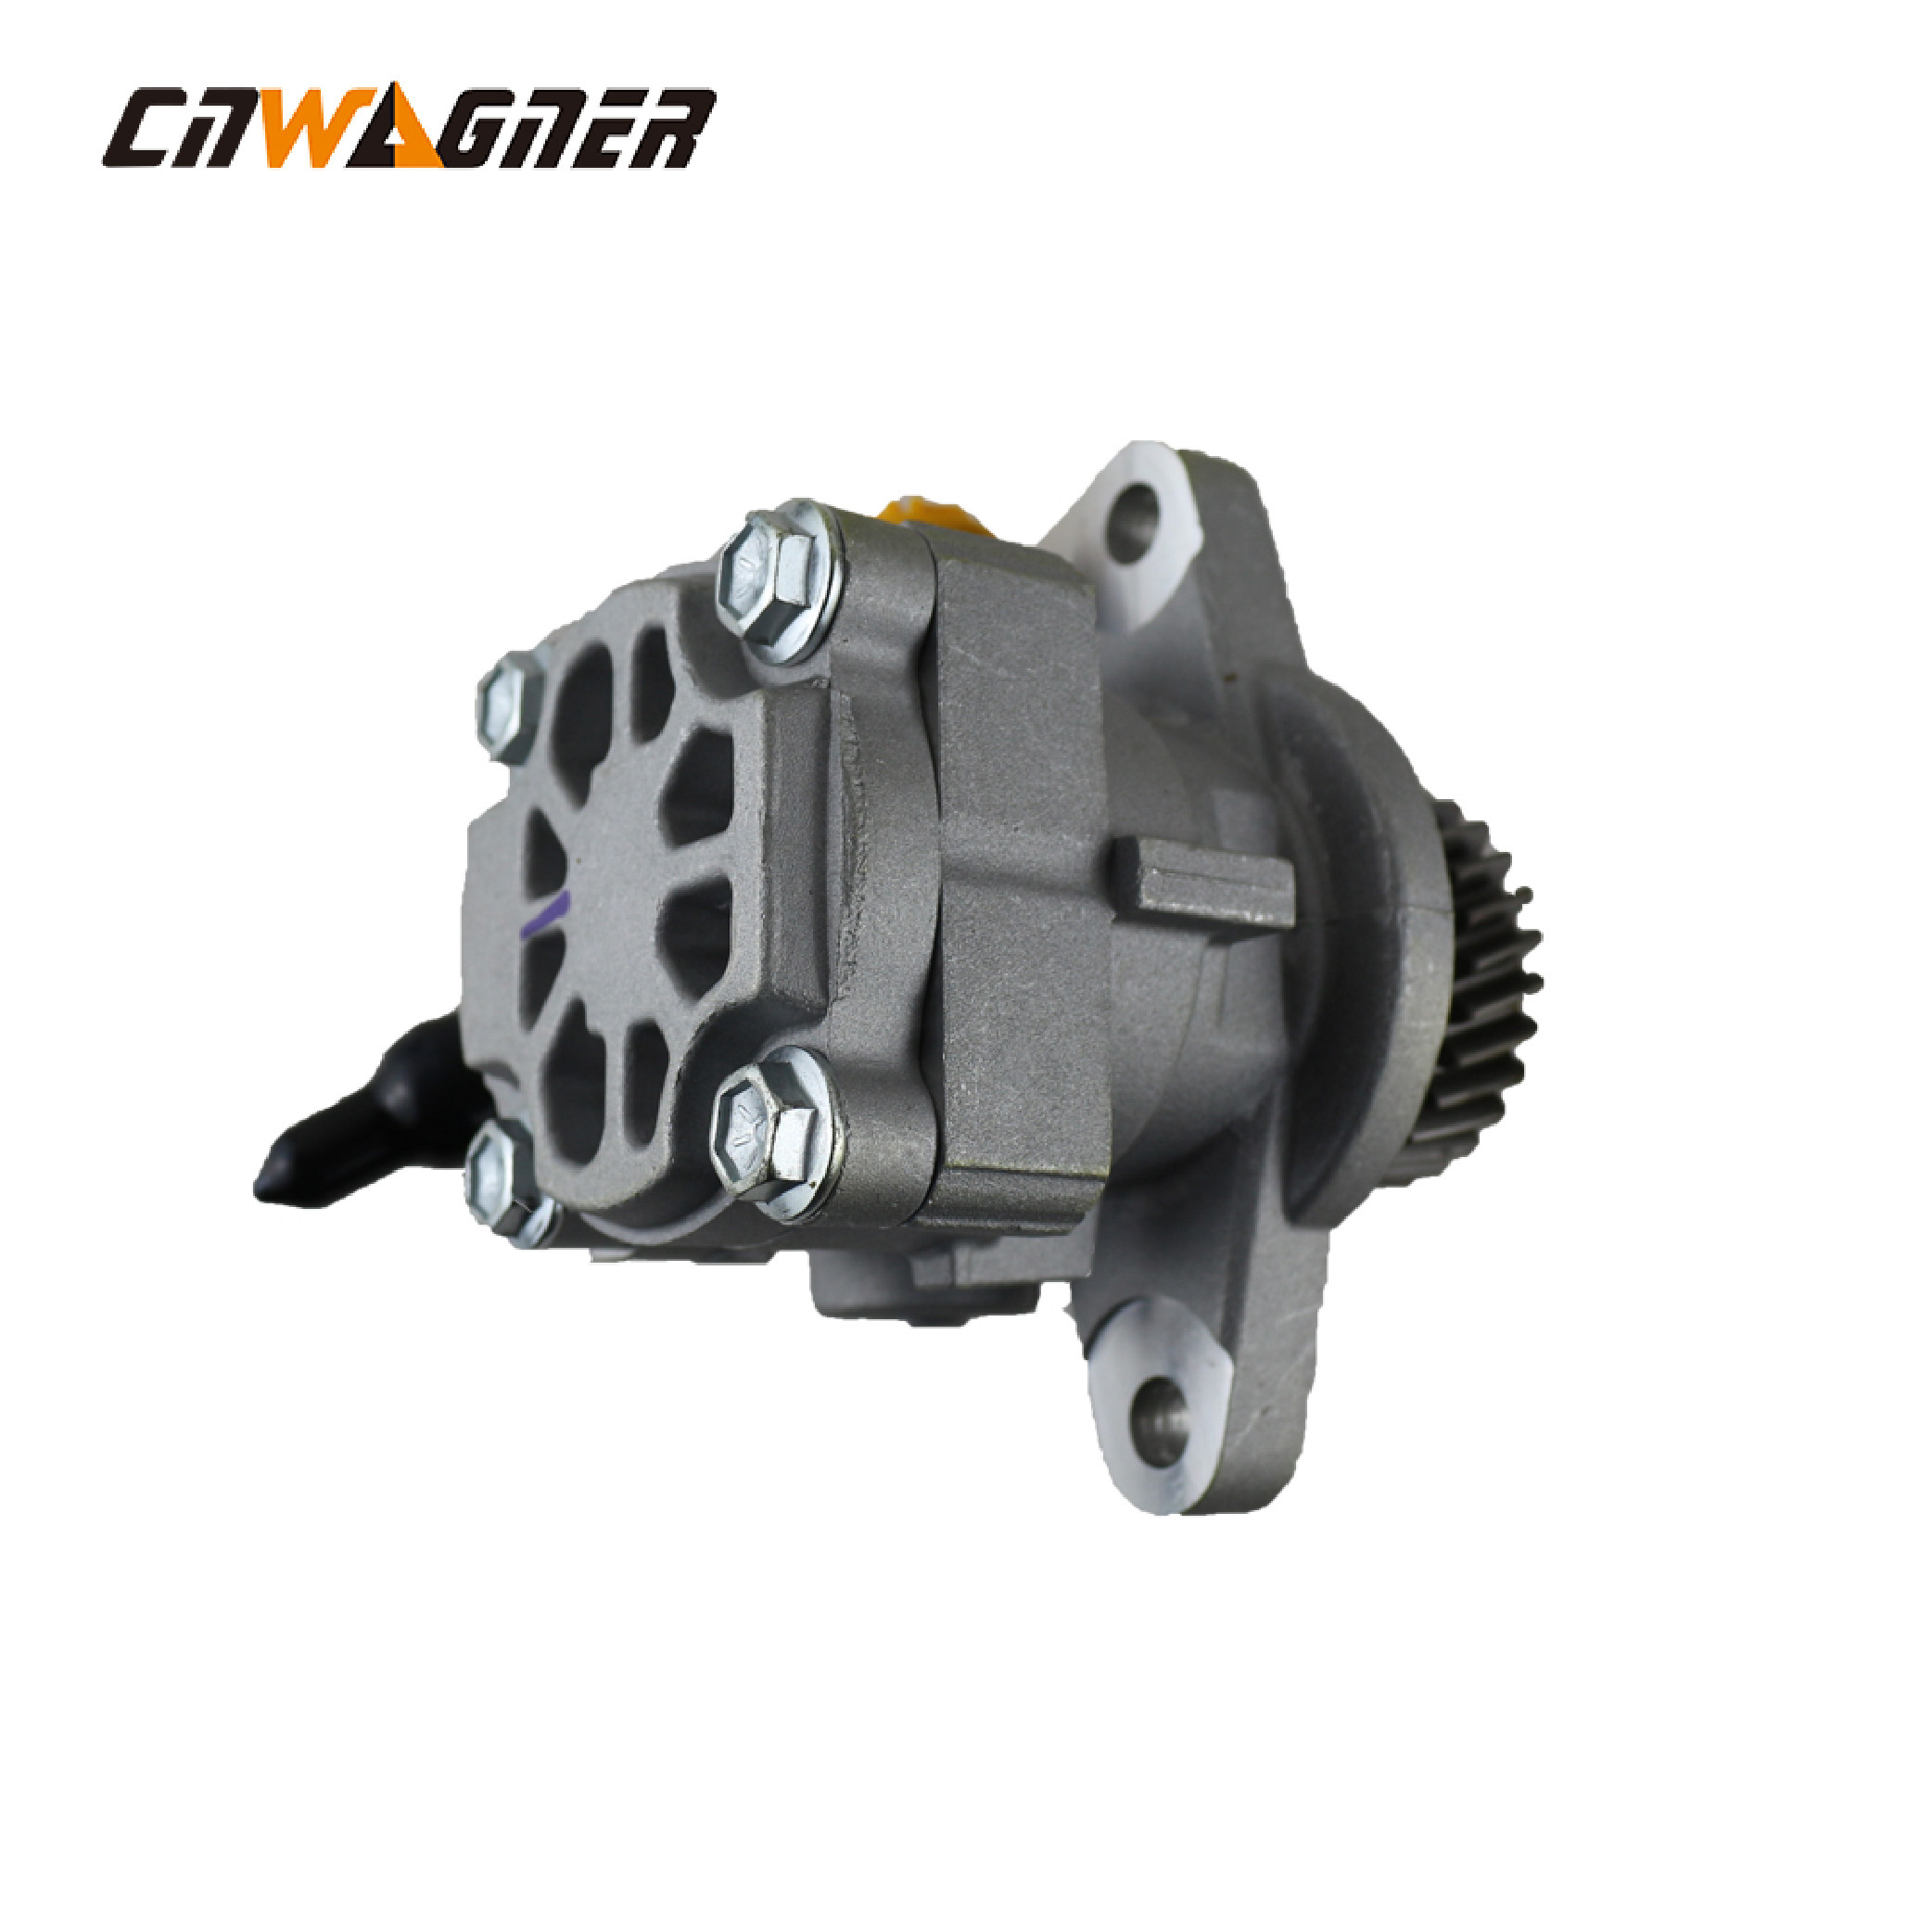 China CNWAGNER Auto Systems Power Steering Pump 44310-60460 factory